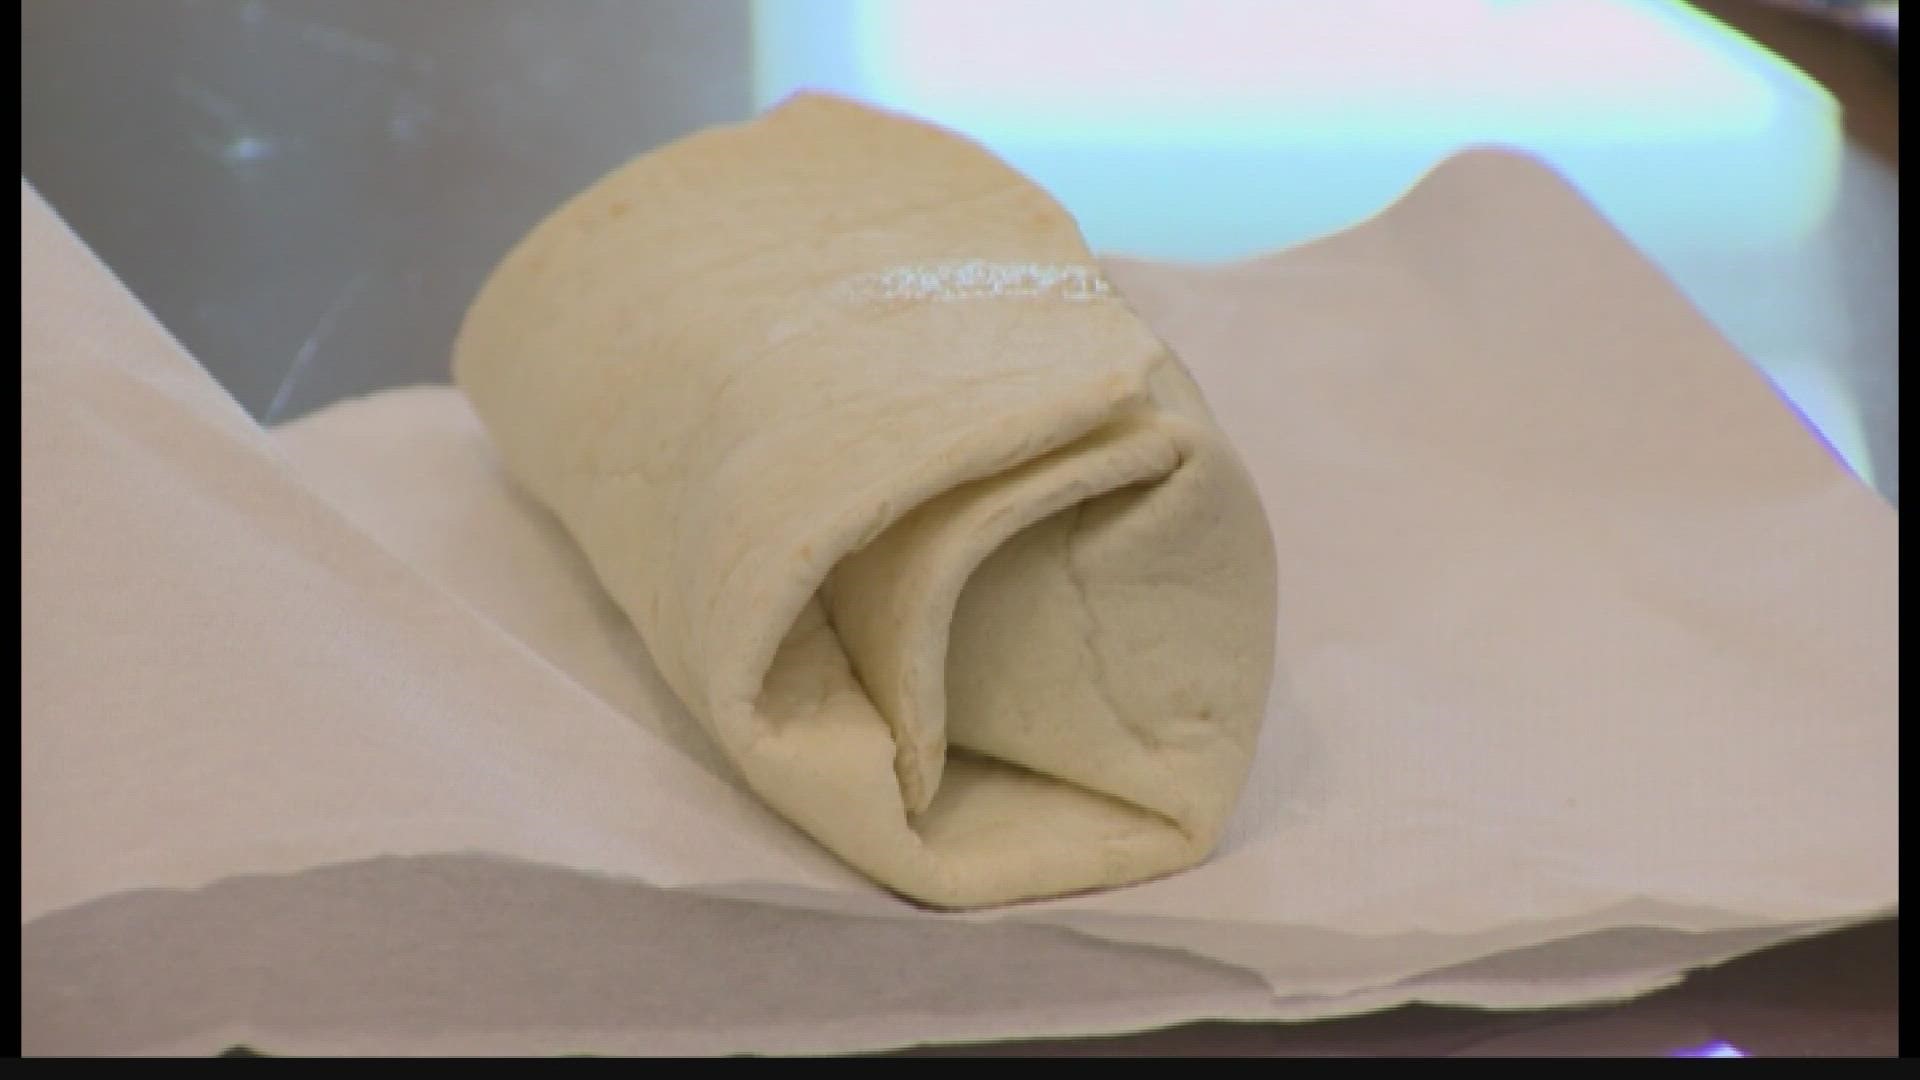 It's an edible adhesive strong enough to hold together a big burrito.